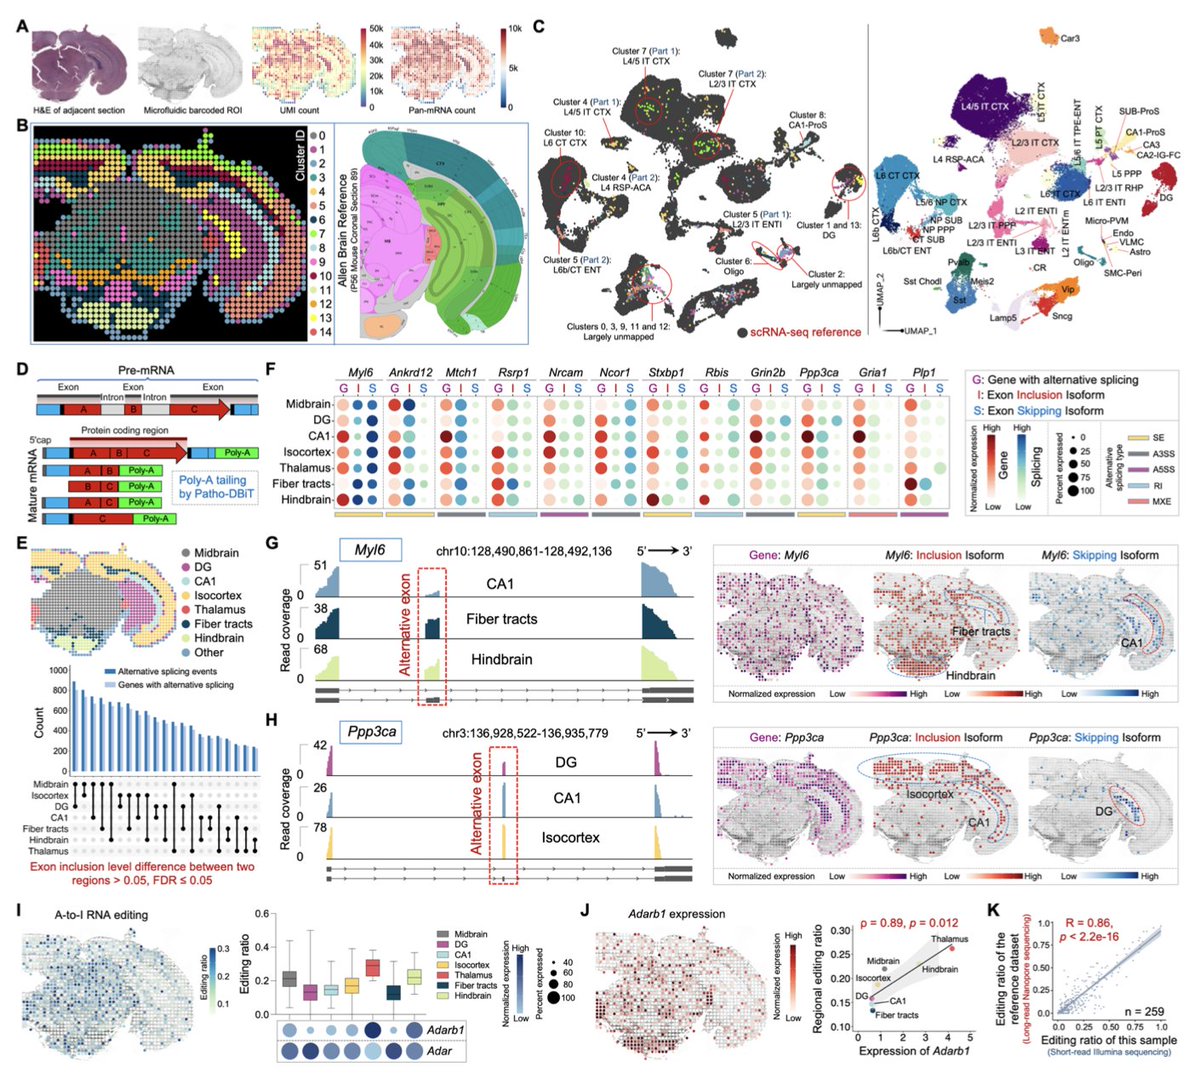 we mapped alternative splicing over the entire hemisphere of mouse brain (FFPE) and discovered a lot of region-specific isoforms :)